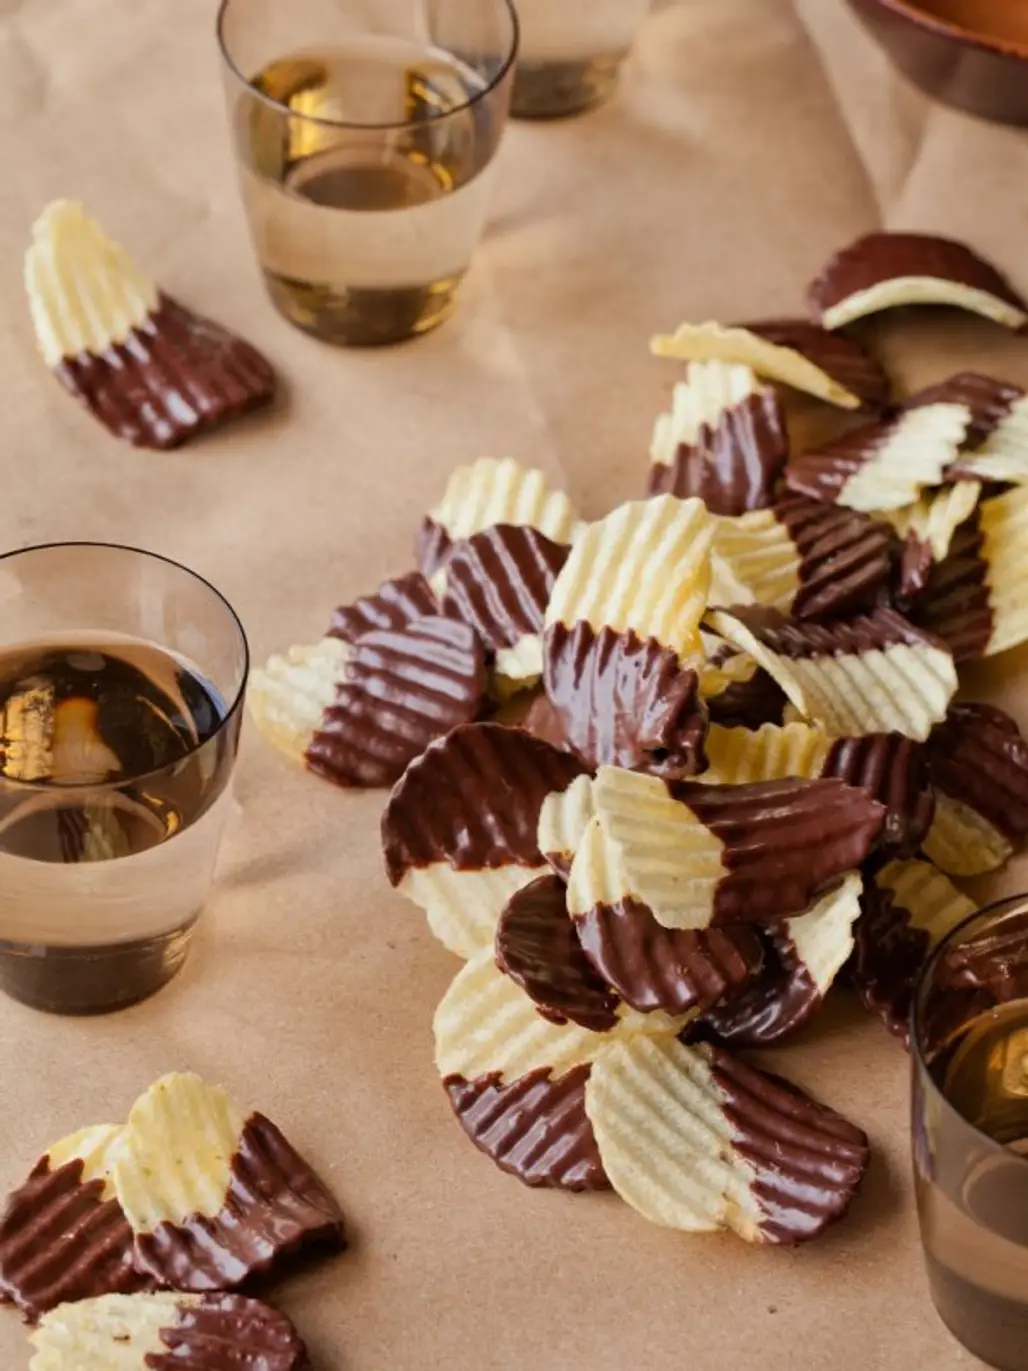 Chocolate Dipped Potato Chips